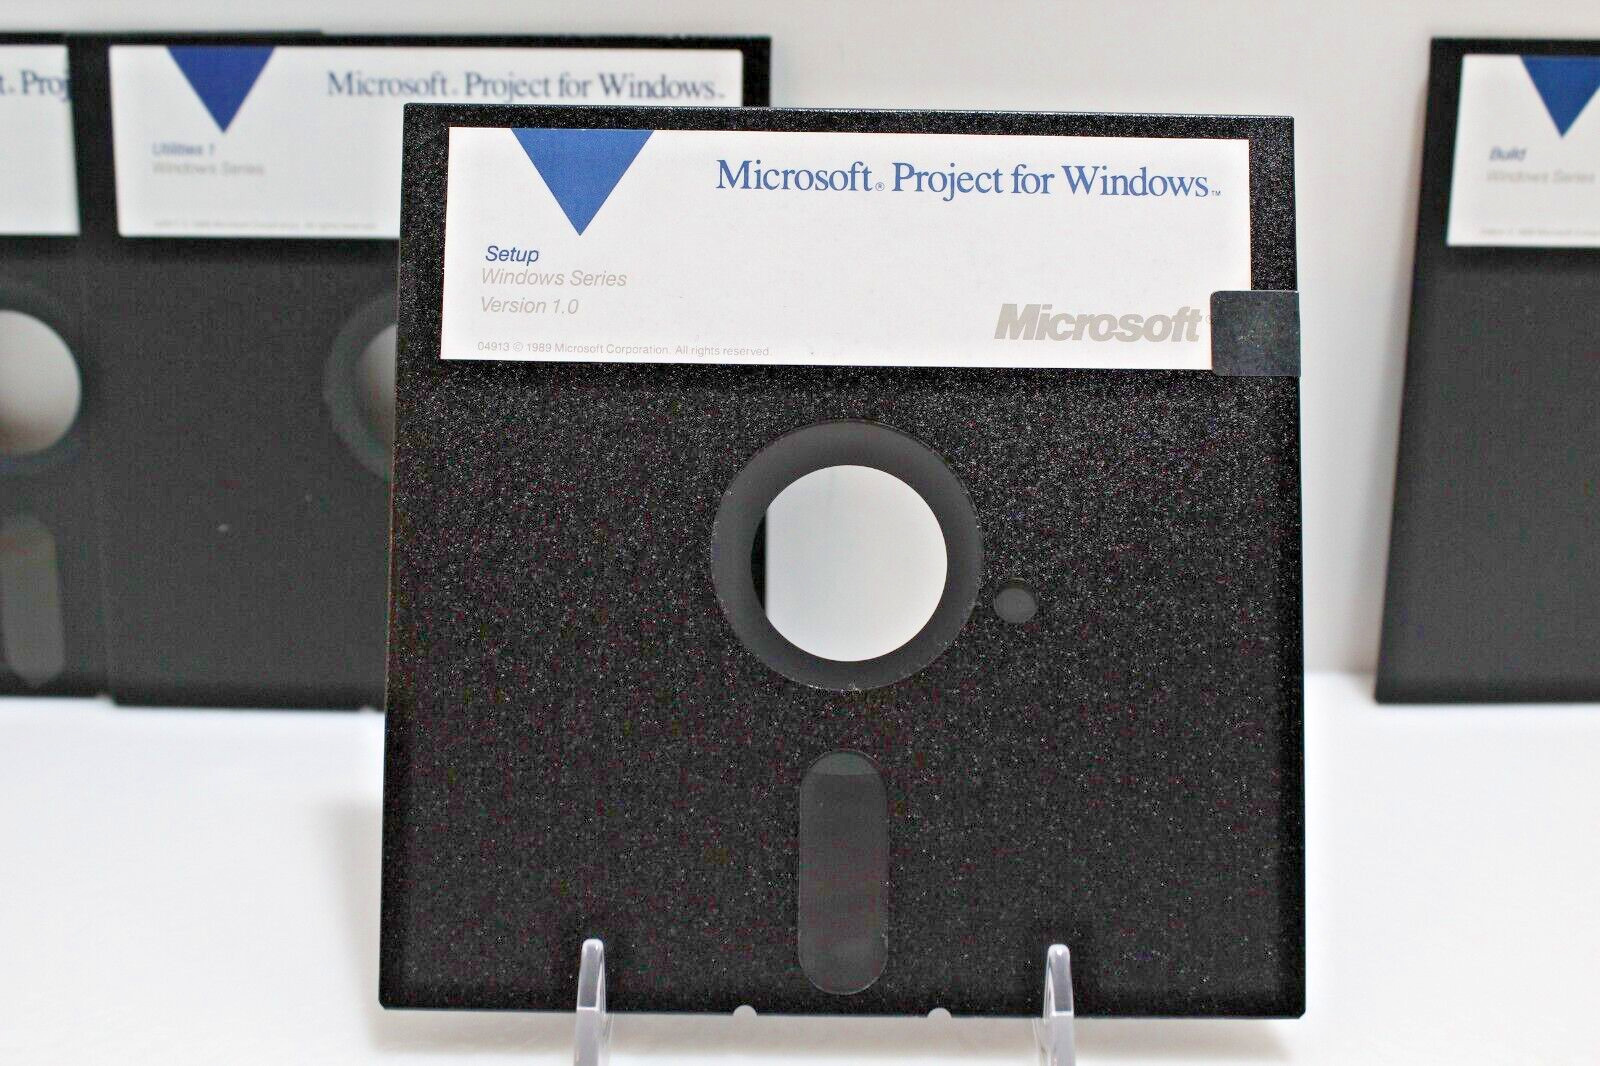 Microsoft Project for Windows; 5 1/4 Floppy Disks, 1989